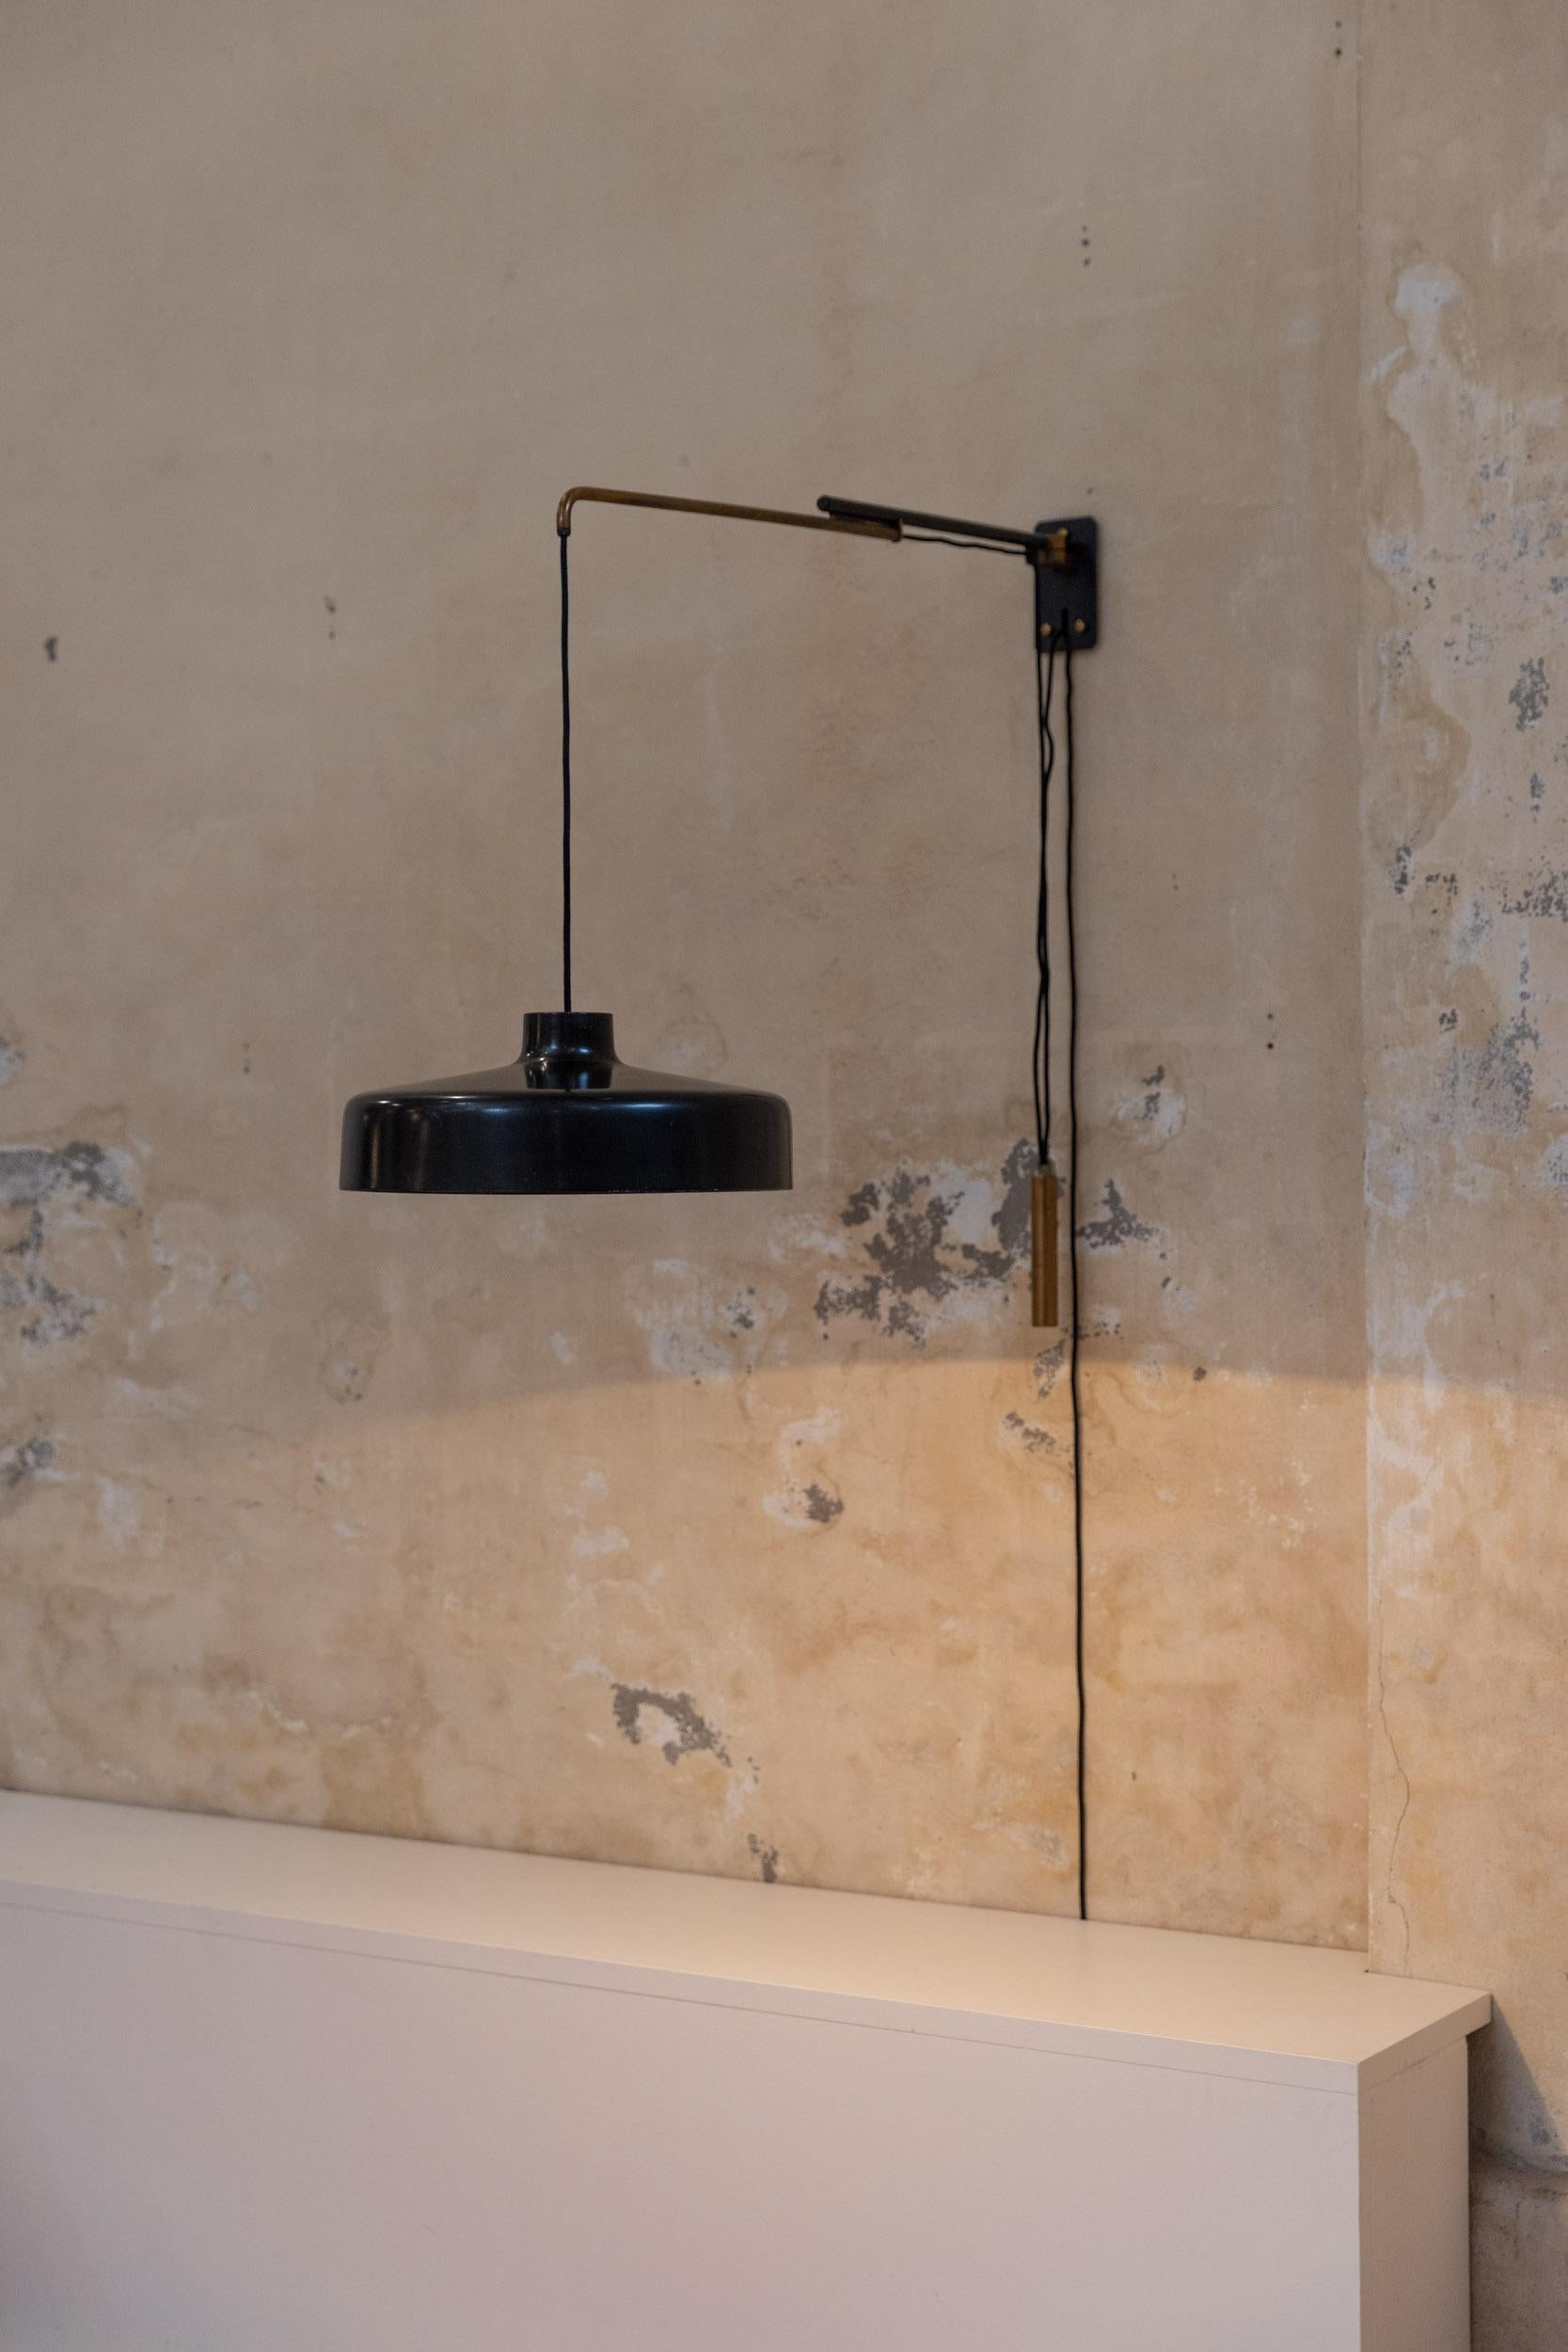 Extending arm wall light model 194n designed by Gino Sarfatti and produced by Arteluce in 1958 circa.
The original structure is composed by a brass multi part arm and a painted aluminium lampshade.
This model can be adjusted and positioned thanks